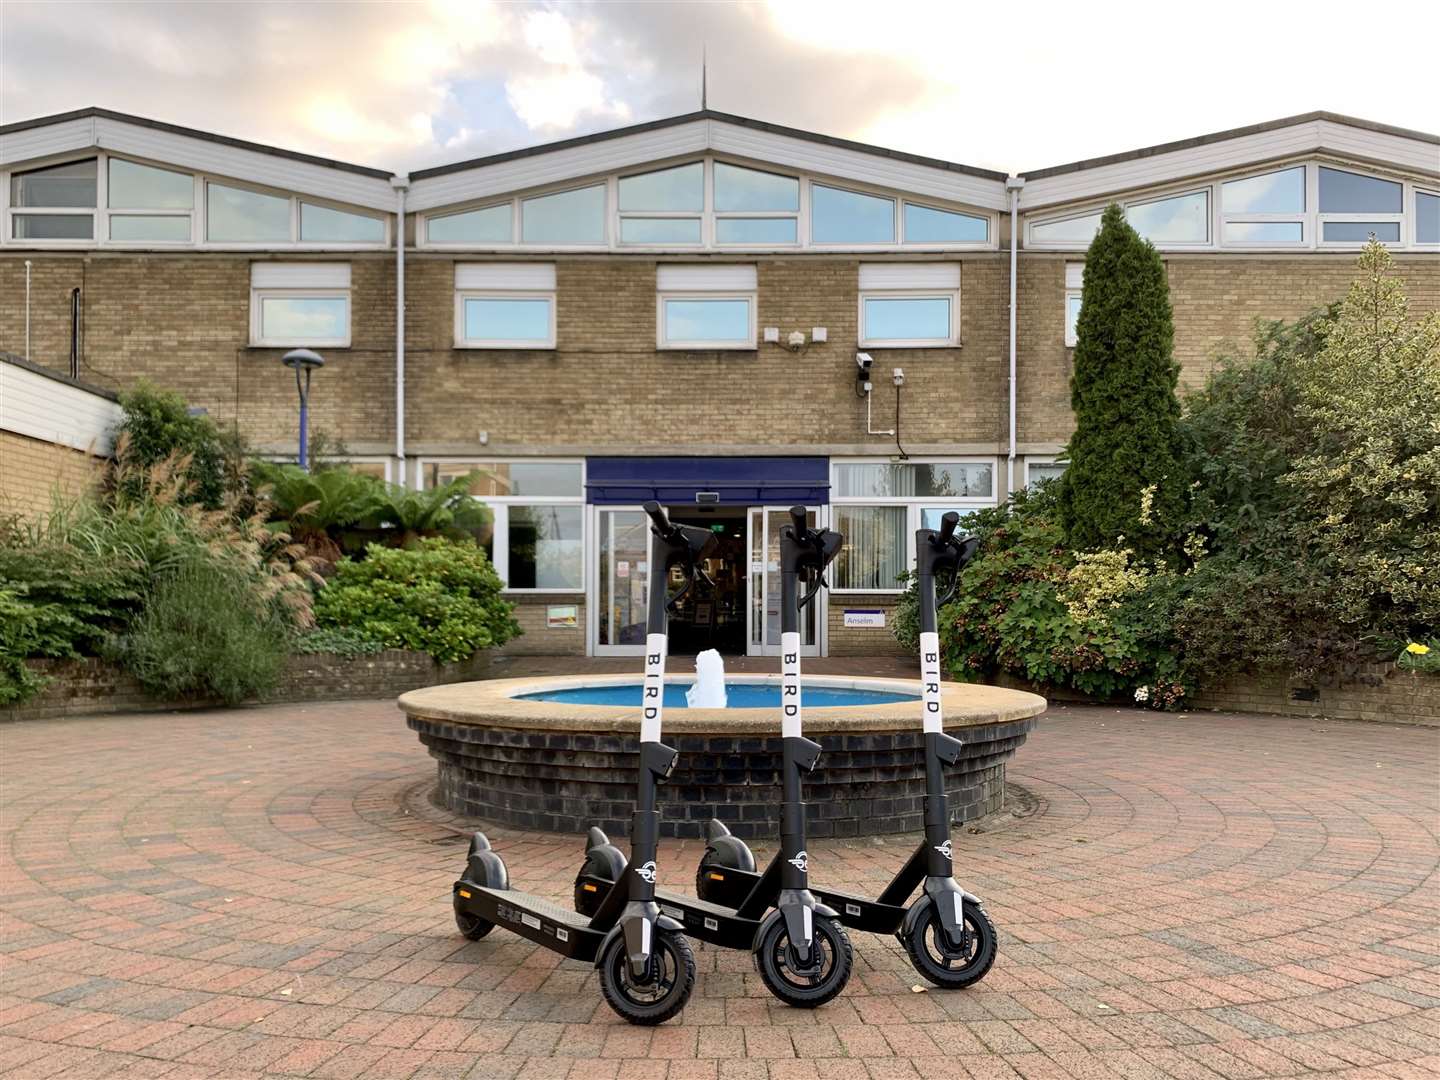 The Bird electric scooters at Canterbury Christ Church. Picture: Bird